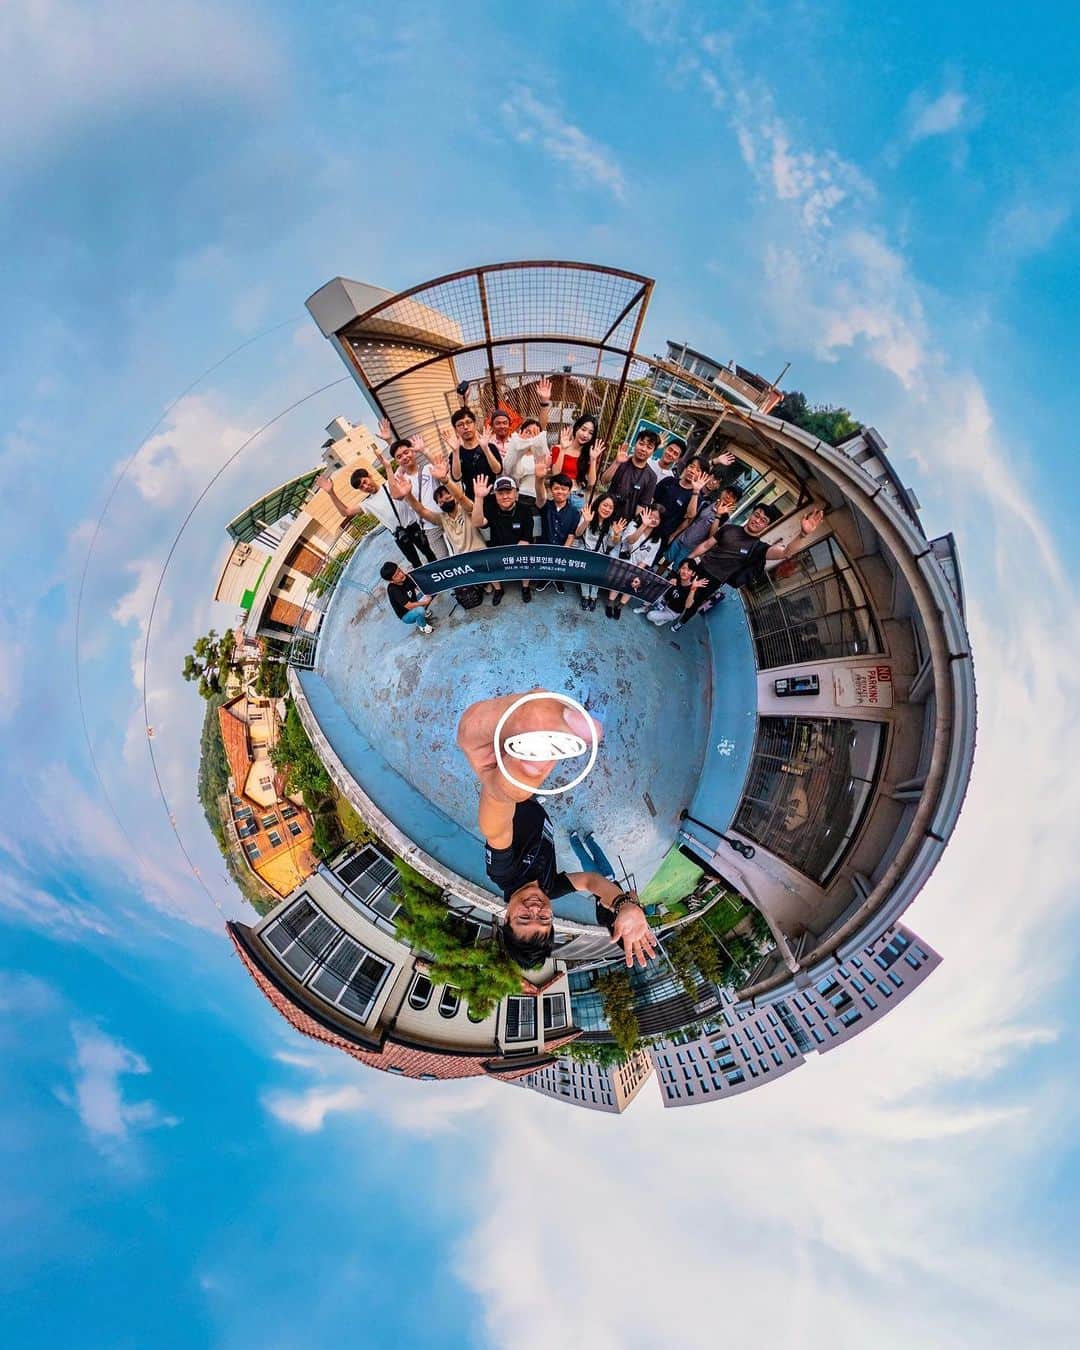 Official RICOH THETAのインスタグラム：「A photo shot with Sigma 📷 Model shooting with users💃🏻 The last proof shot is always in the shape of a🌕 .  🍭RICOH THETA Z1  📸: @pop.c.master  ***************** Please add #theta360 to your photos shot with THETA and post them😊 . . . . . #ricohusa #ricoh #ricohimaging #ricohtheta #lifein360 #360camera #360view #camera #cameratips #cameralover #photographylovers #photographer #photooftheday #photographytips #cameragear #photoediting #editingtips #art #360photography"」